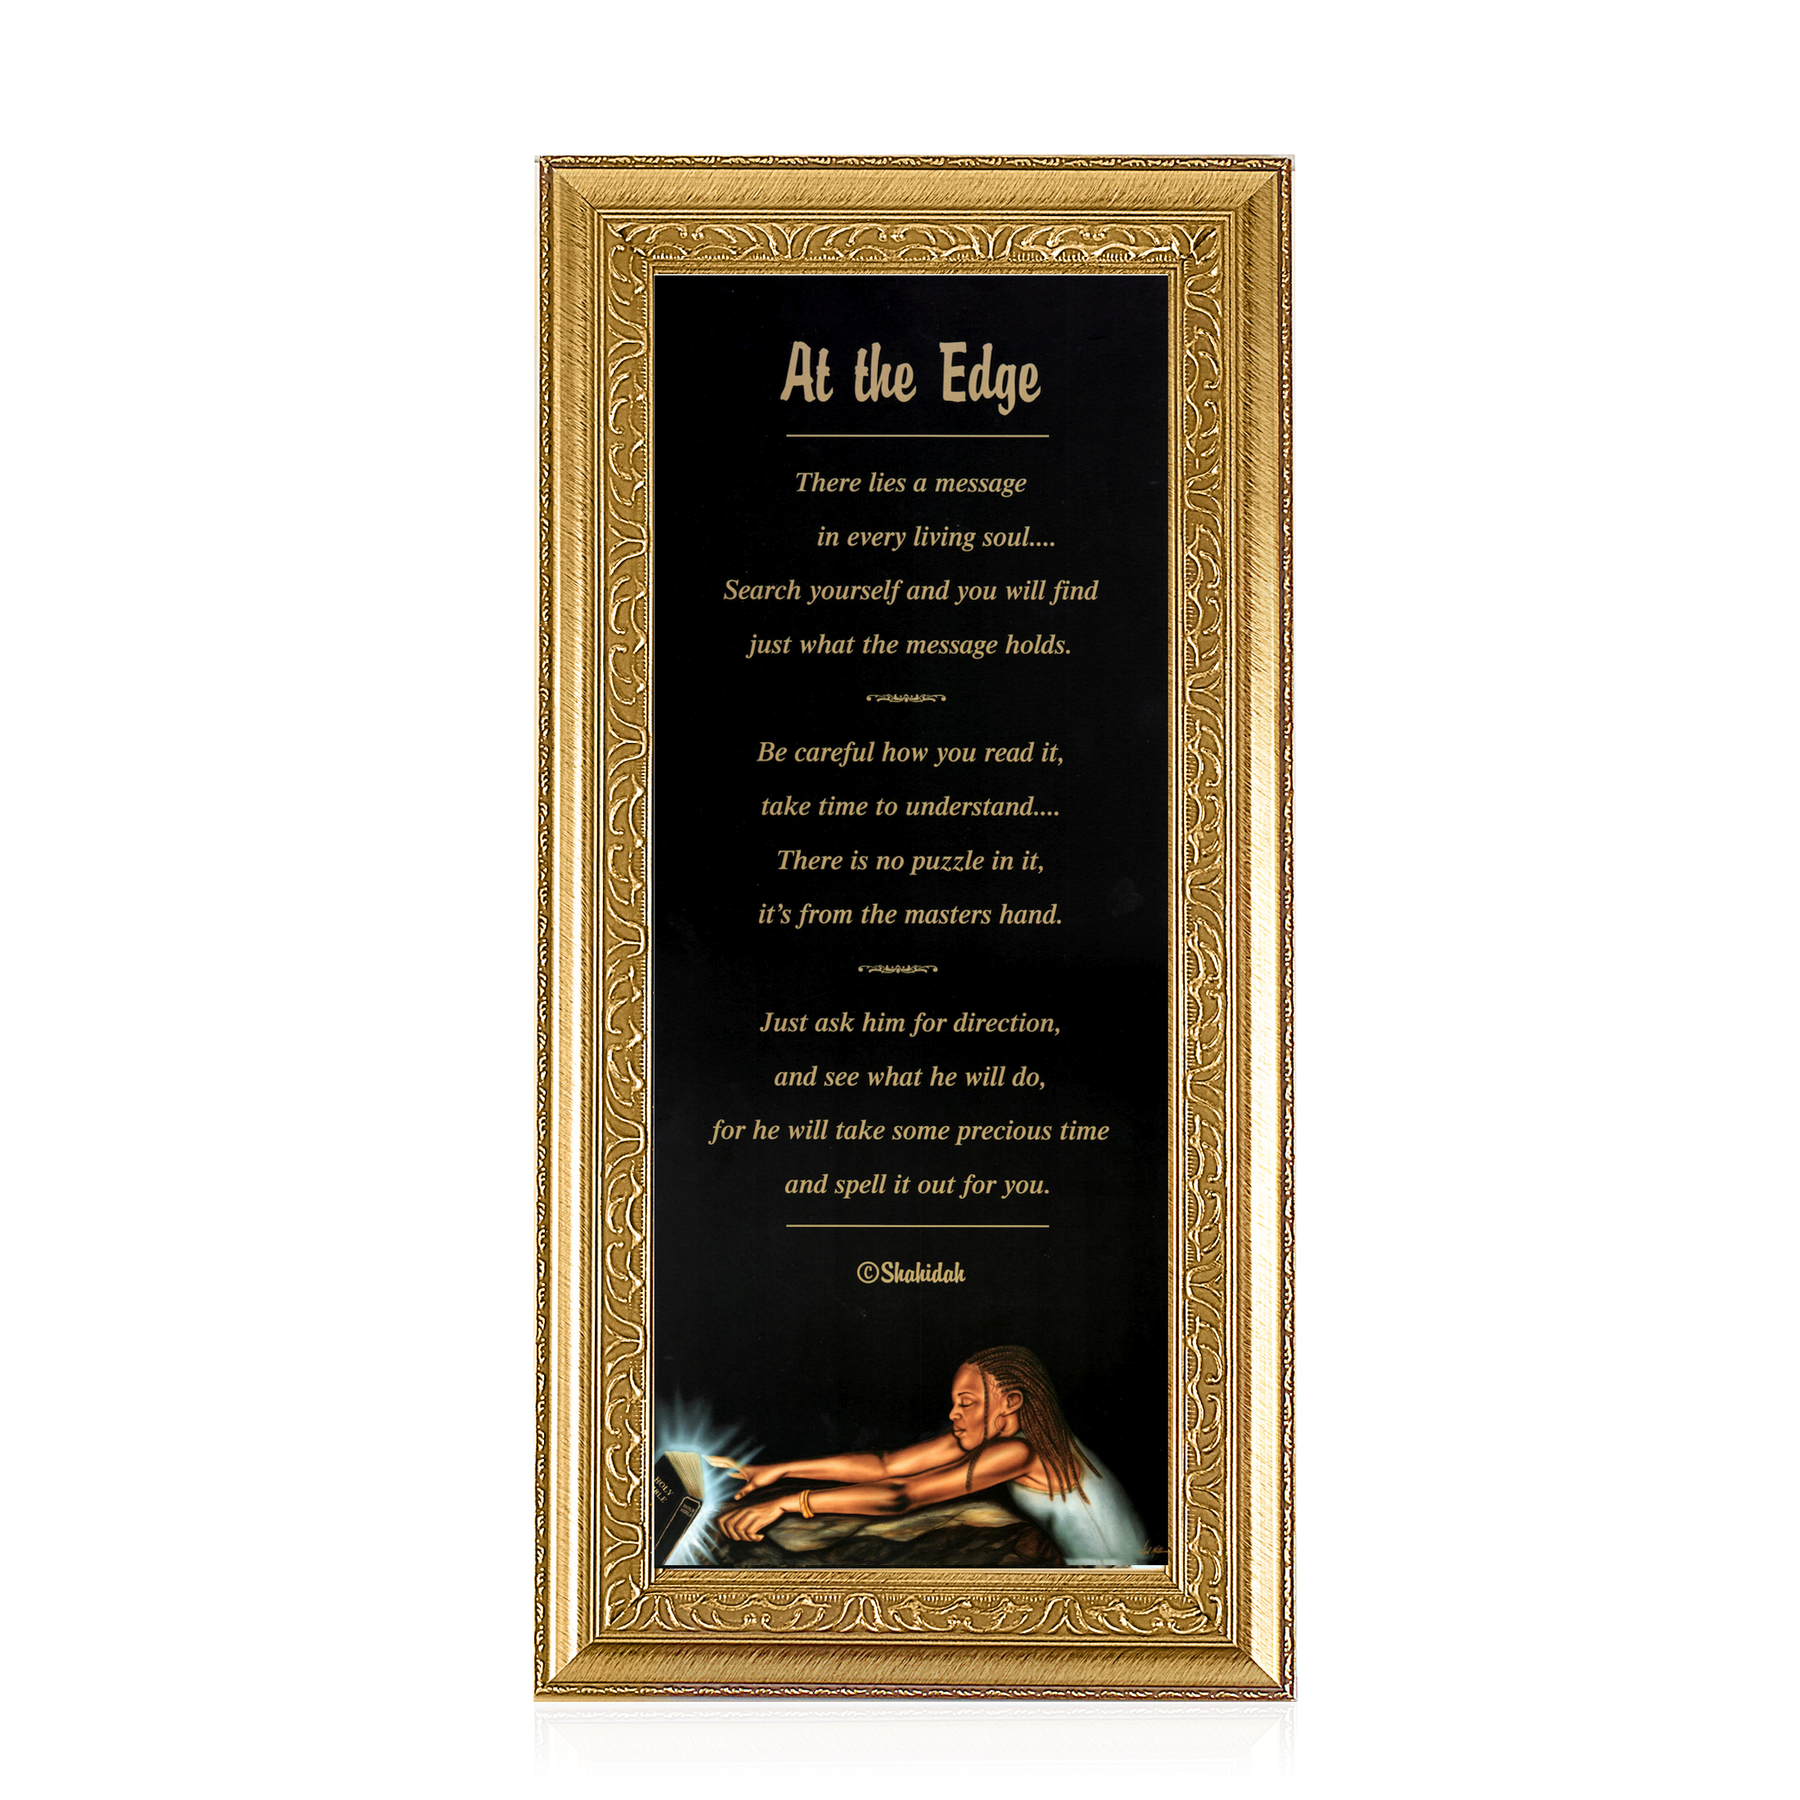 4 of 4: At the Edge (Female) by Fred Mathews and Shahidah (Gold Frame)